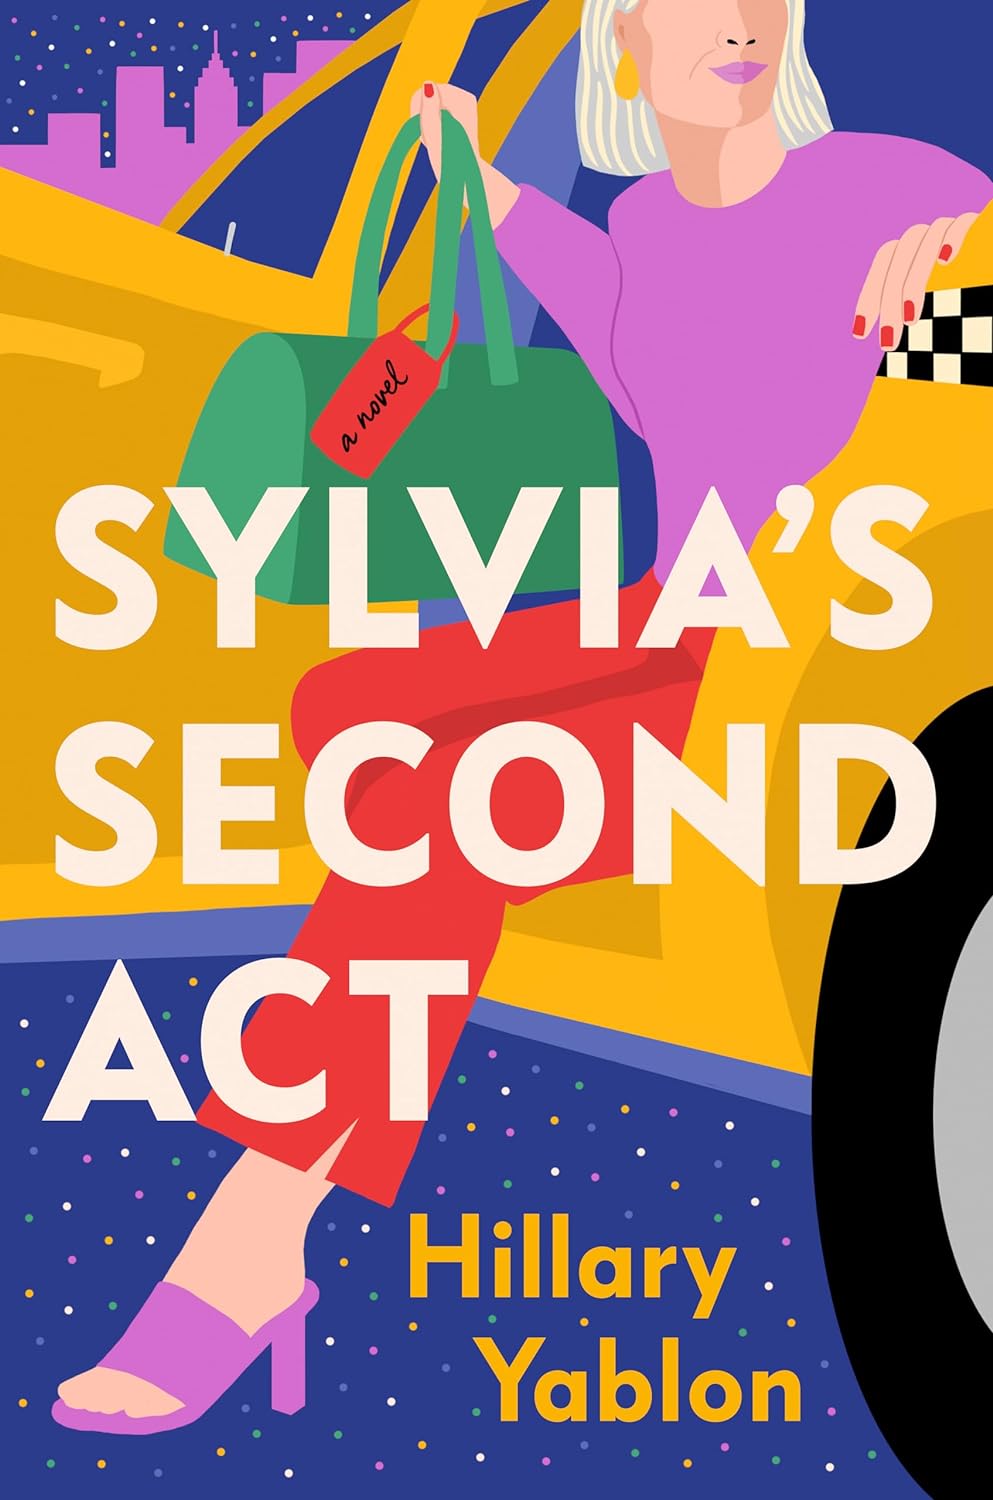 Image for "Sylvia's Second Act"